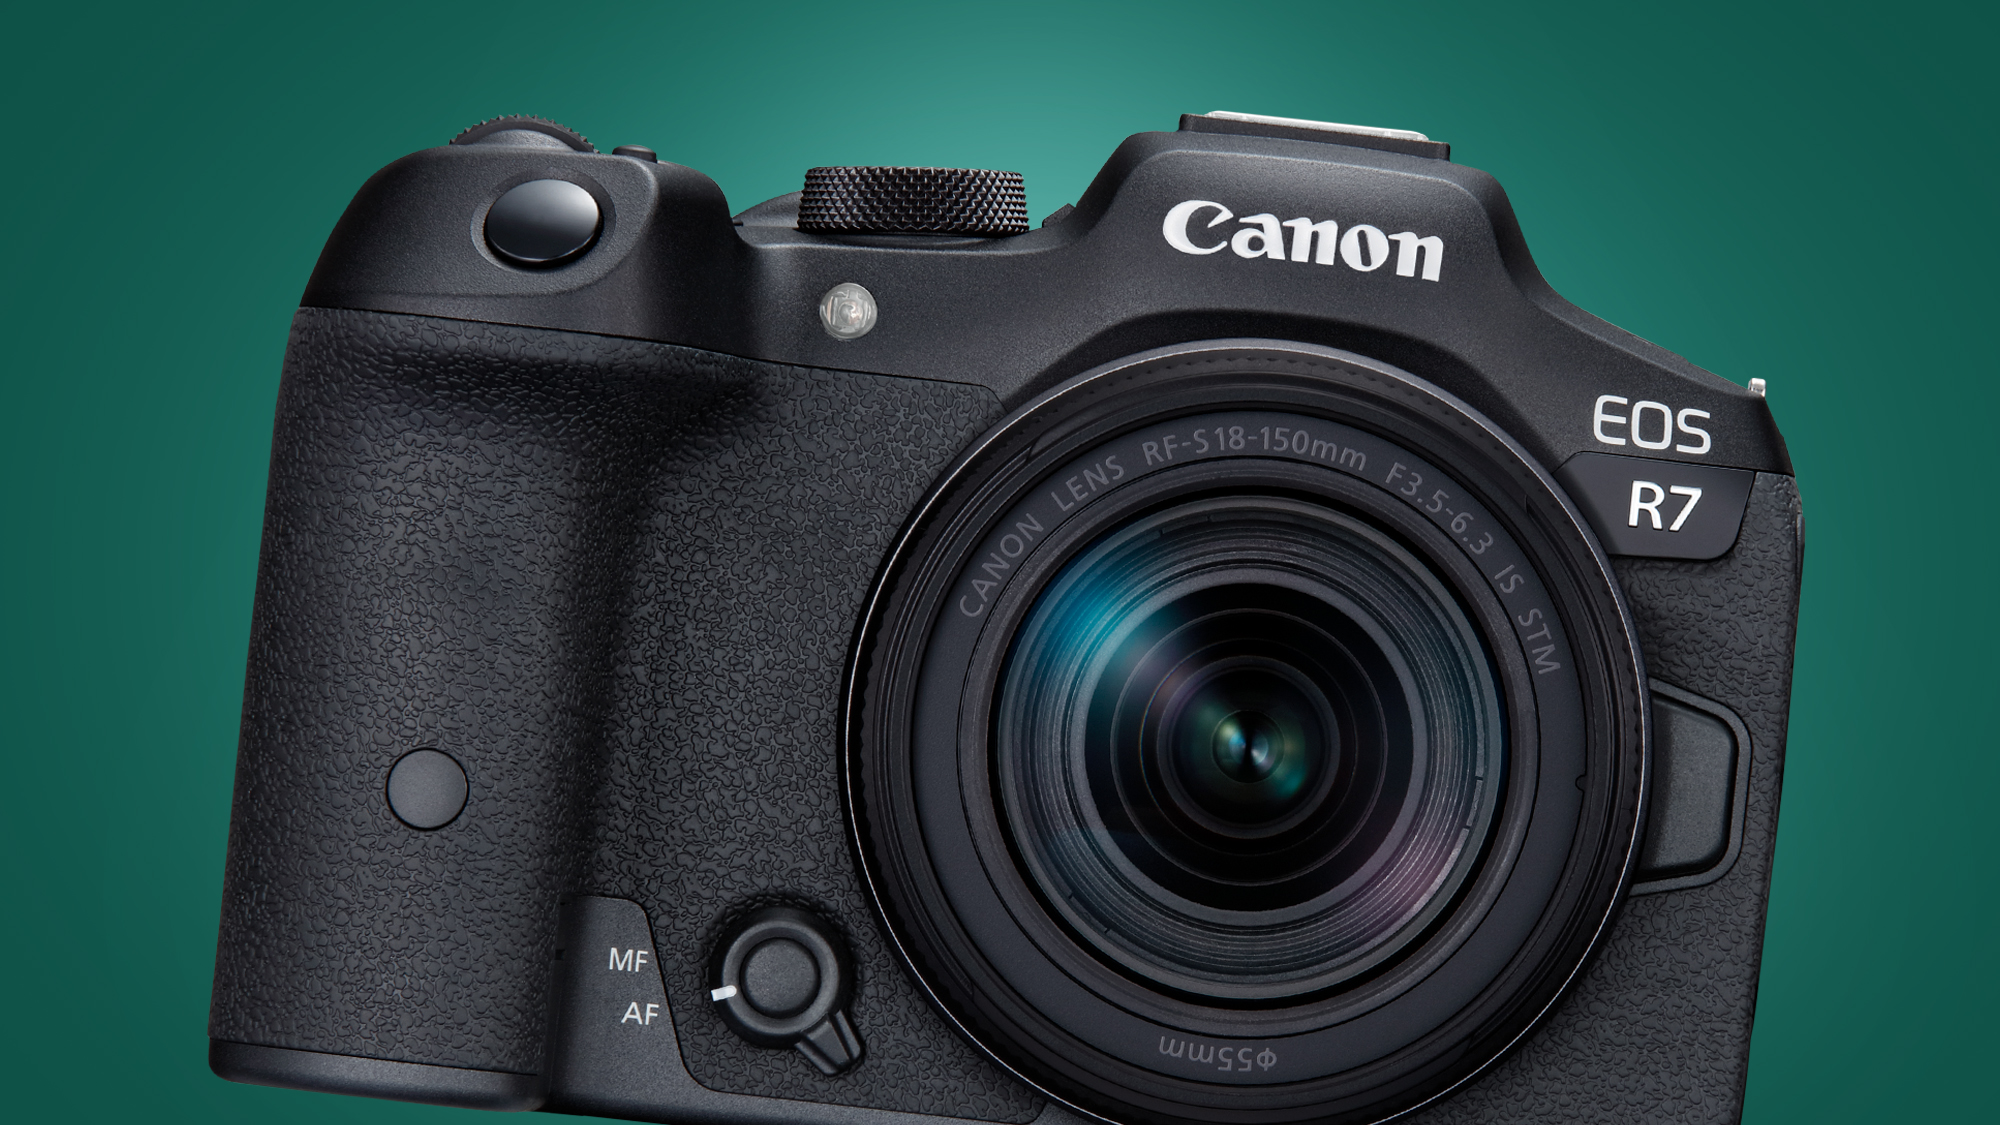 Canon EOS R7 camera on a green background